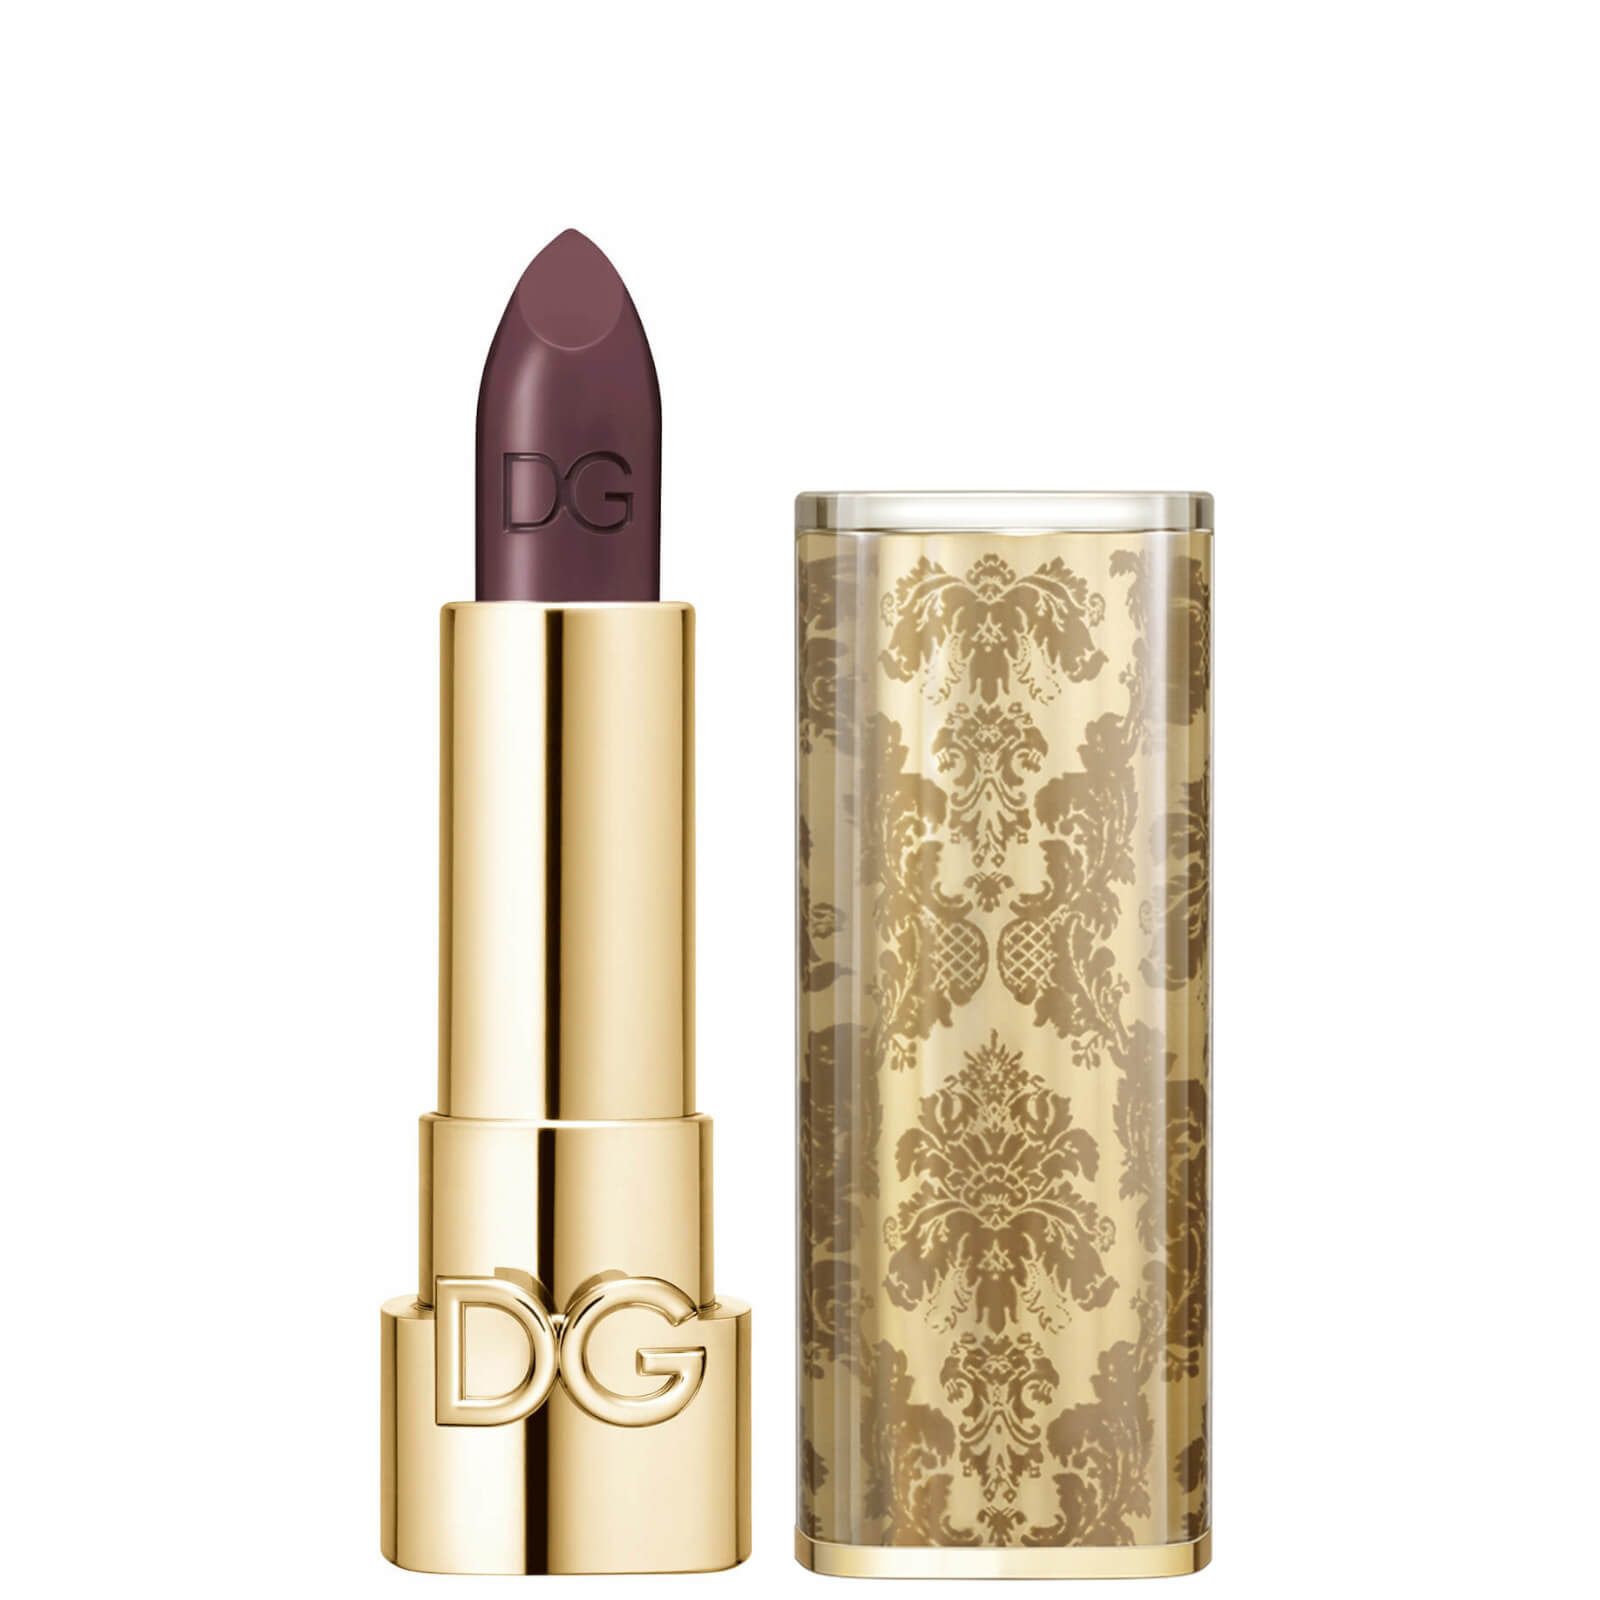 Dolce&Gabbana The Only One Lipstick + Cap (Damasco) (Various Shades) - 330 Bright Amethyst